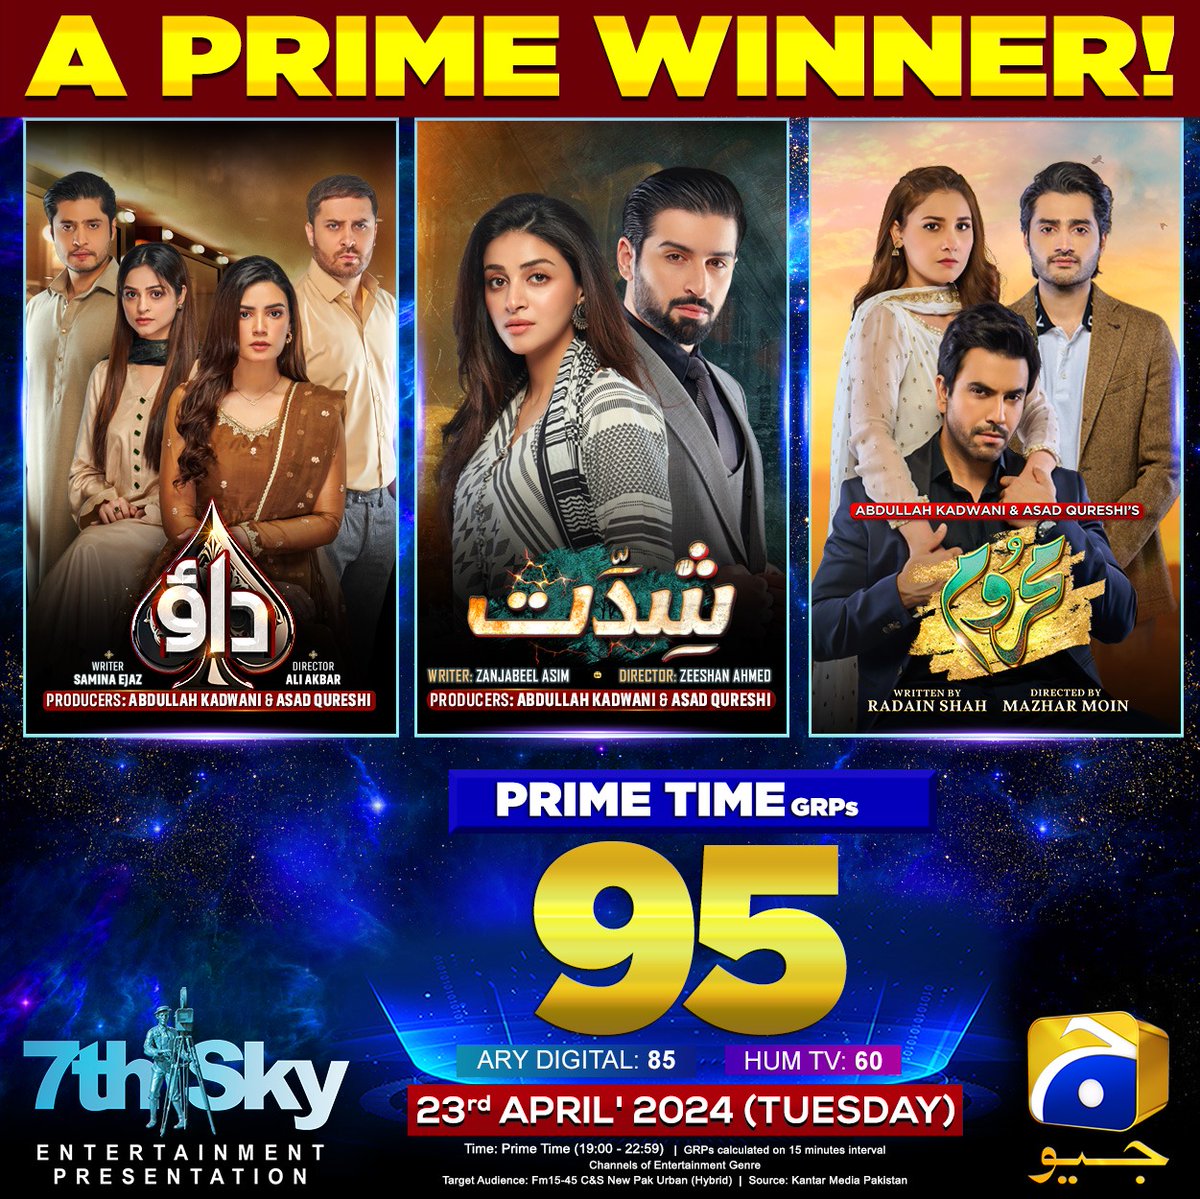 On top of the game! Geo Entertainment achieves the highest GRPs among local channels. Thanks to our amazing viewers and the dedicated crew for their contributions. 📷📷

#GeoEntertainment #GeoTV #HarPalGeo #7thSkyEntertainment #AbdullahKadwani #AsadQureshi